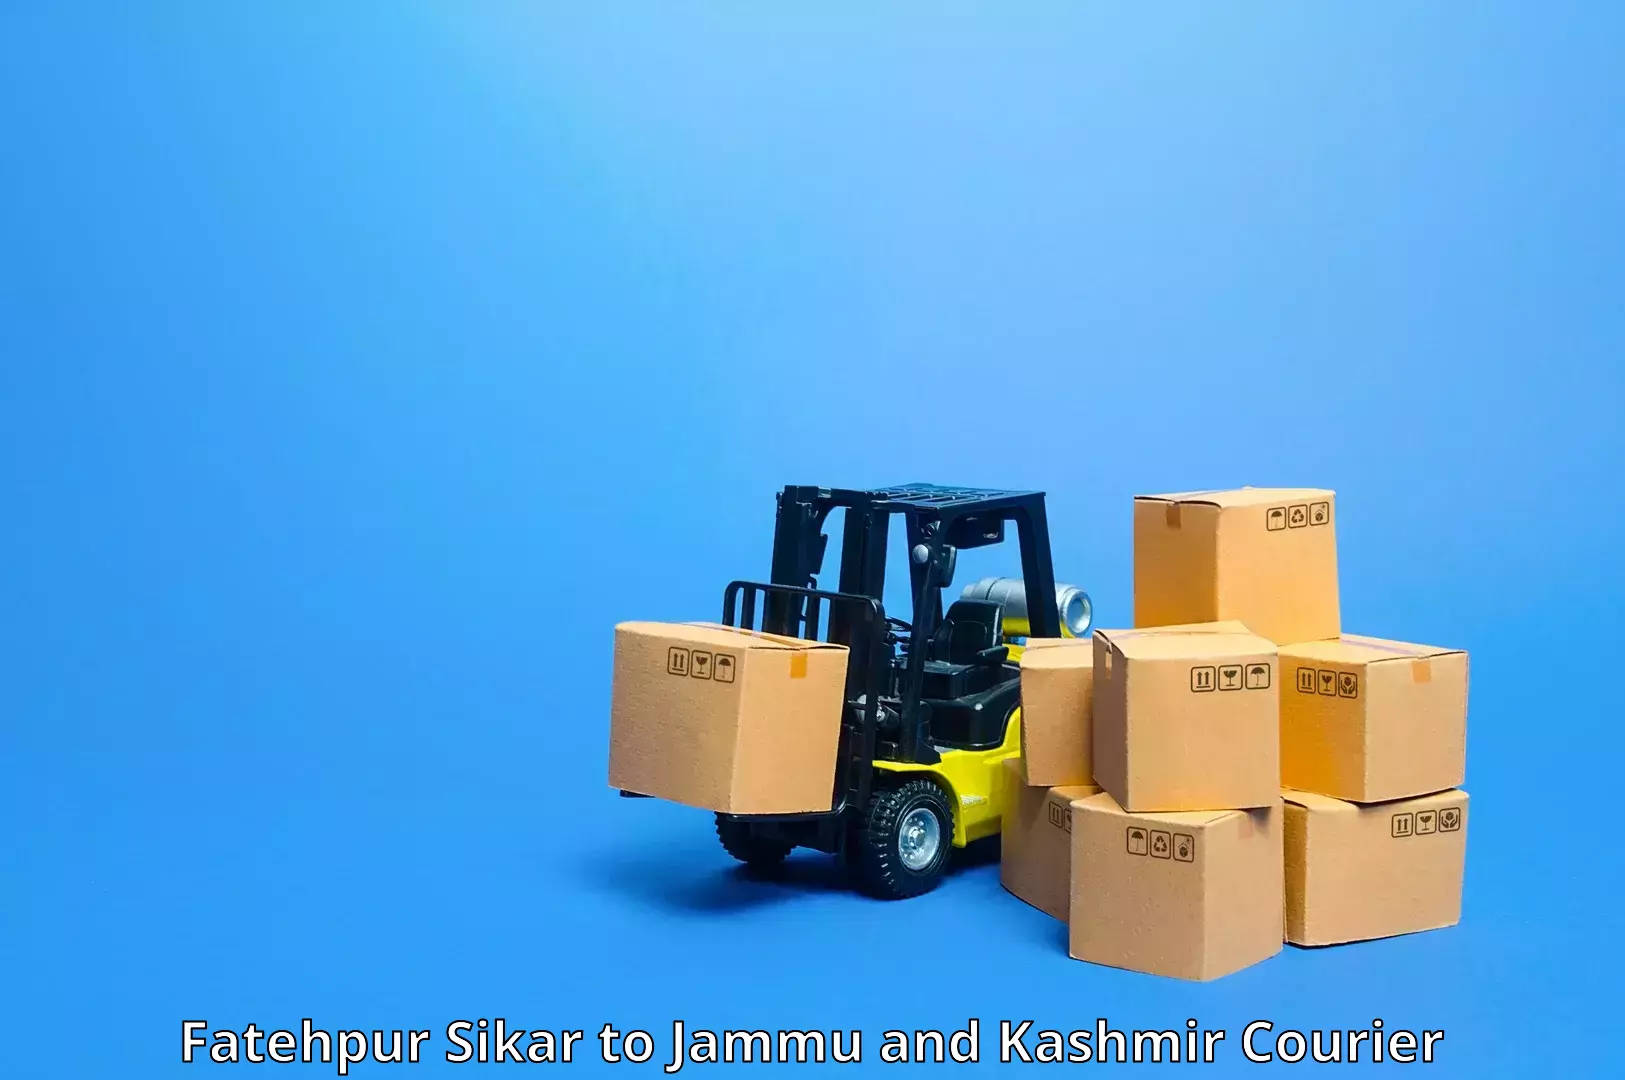 Nationwide shipping coverage Fatehpur Sikar to Katra